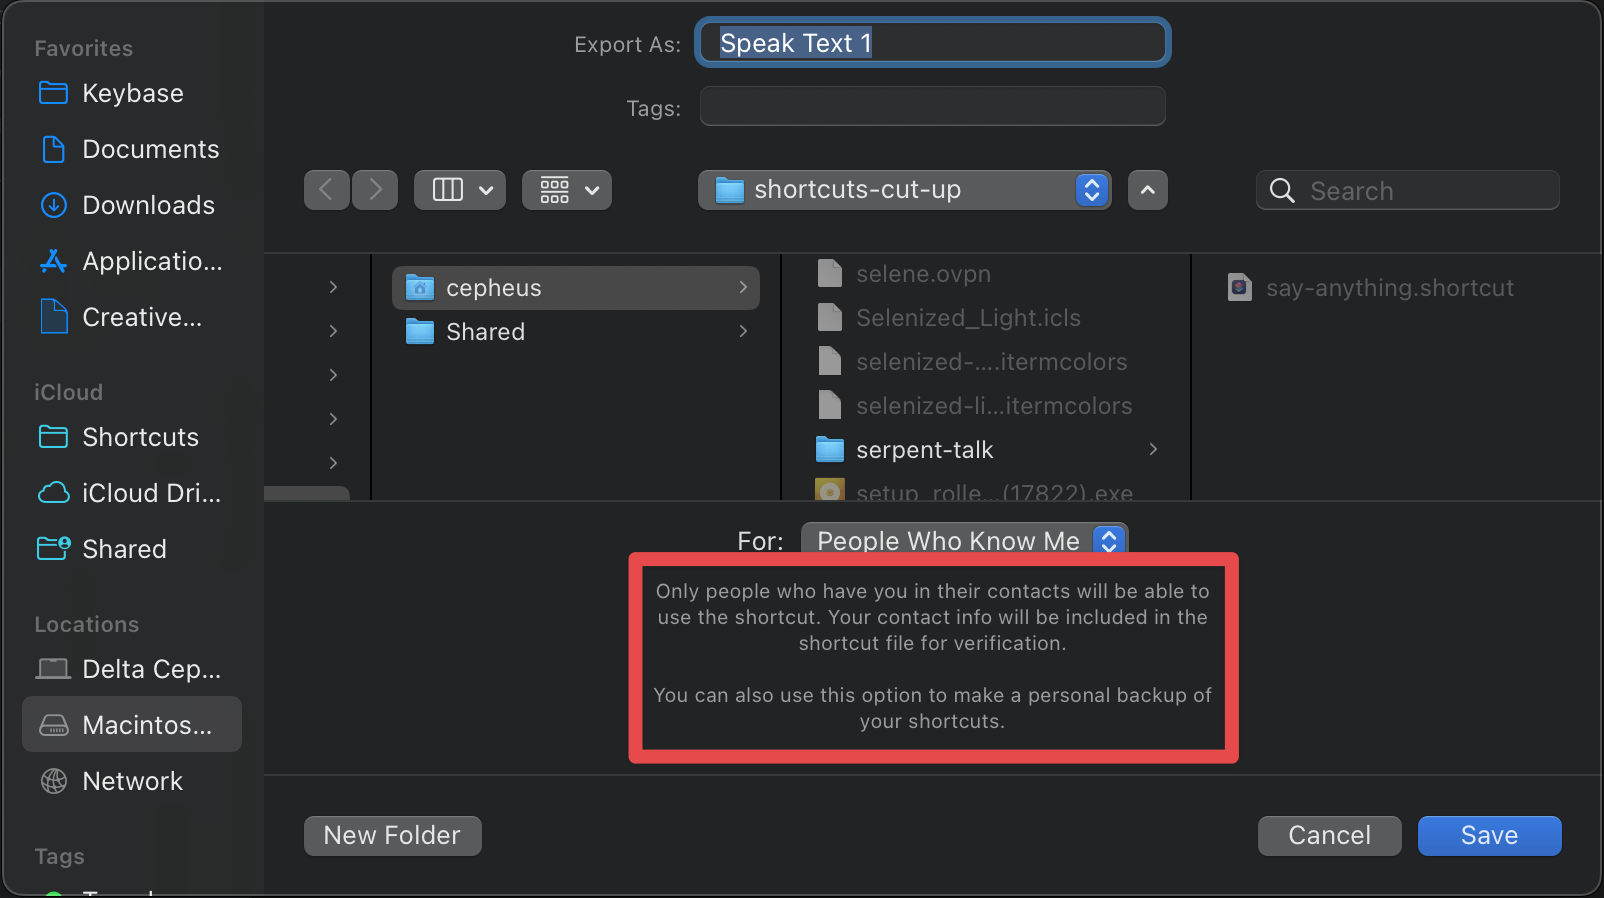 Screenshot of the same export dialogue from Shortcuts as previous. The screen is captioned with the following warning: “Only people who have you in their contacts will be able to use the shortcut. Your contact info will be included in the shortcut file for verification. You can also use this option to make a personal backup of your shortcuts.”